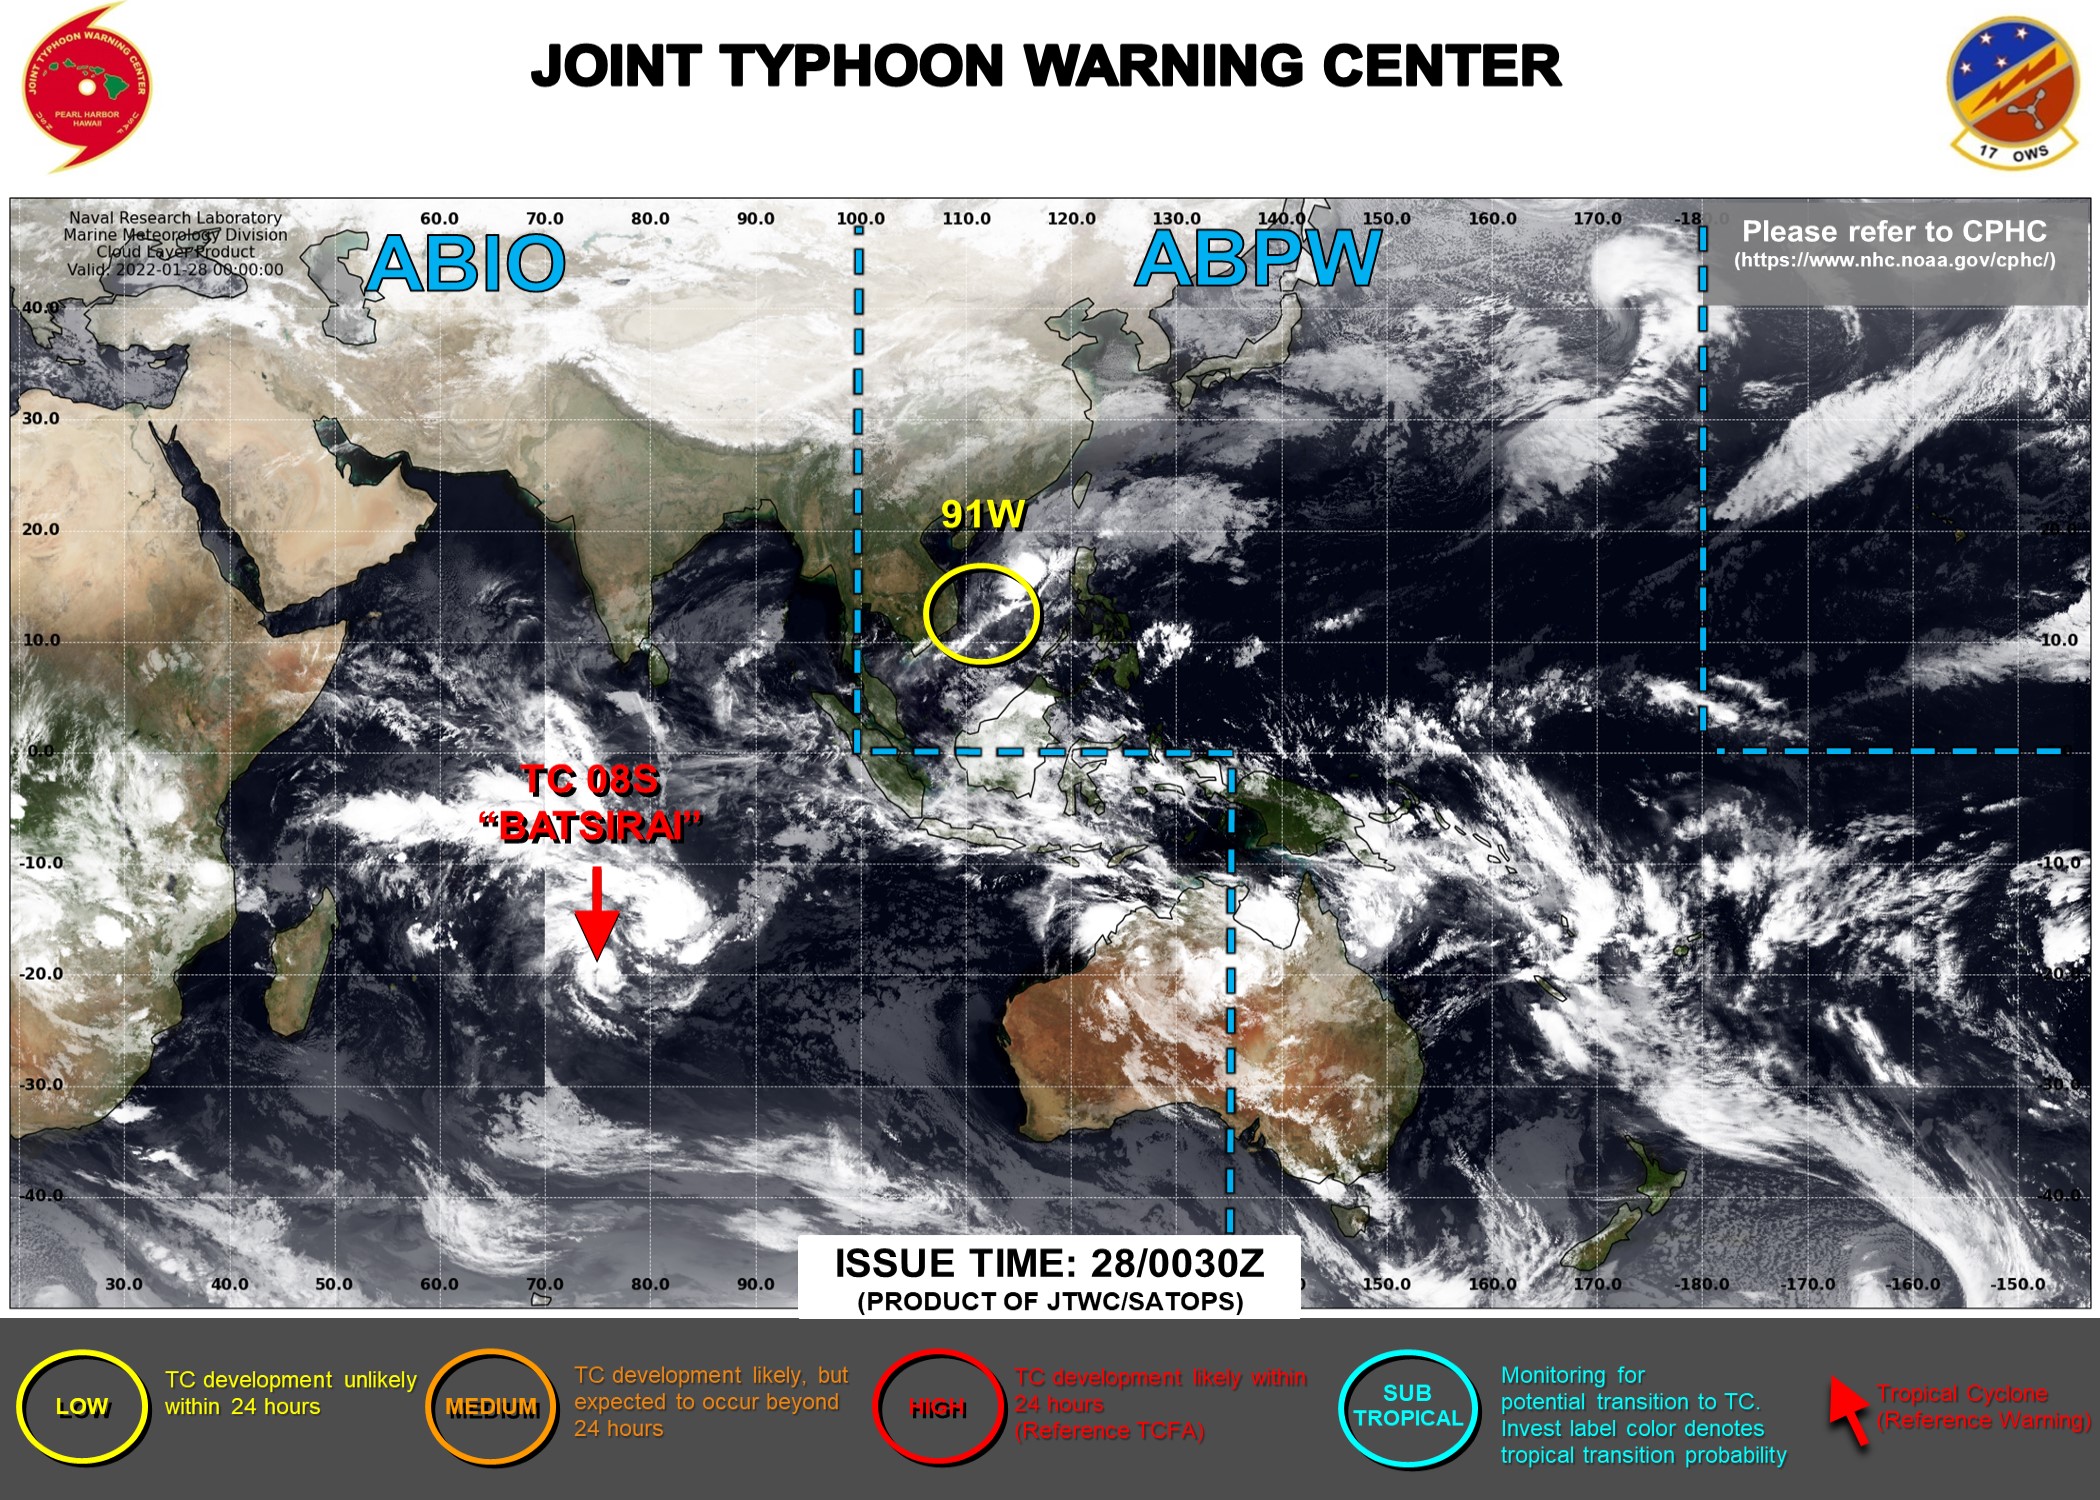 JTWC IS ISSUING 12HOURLY WARNINGS ON TC 08S(BATSIRAI) AND 3HOURLY SATELLITE BULLETINS ON 08S AND INVEST 91W.